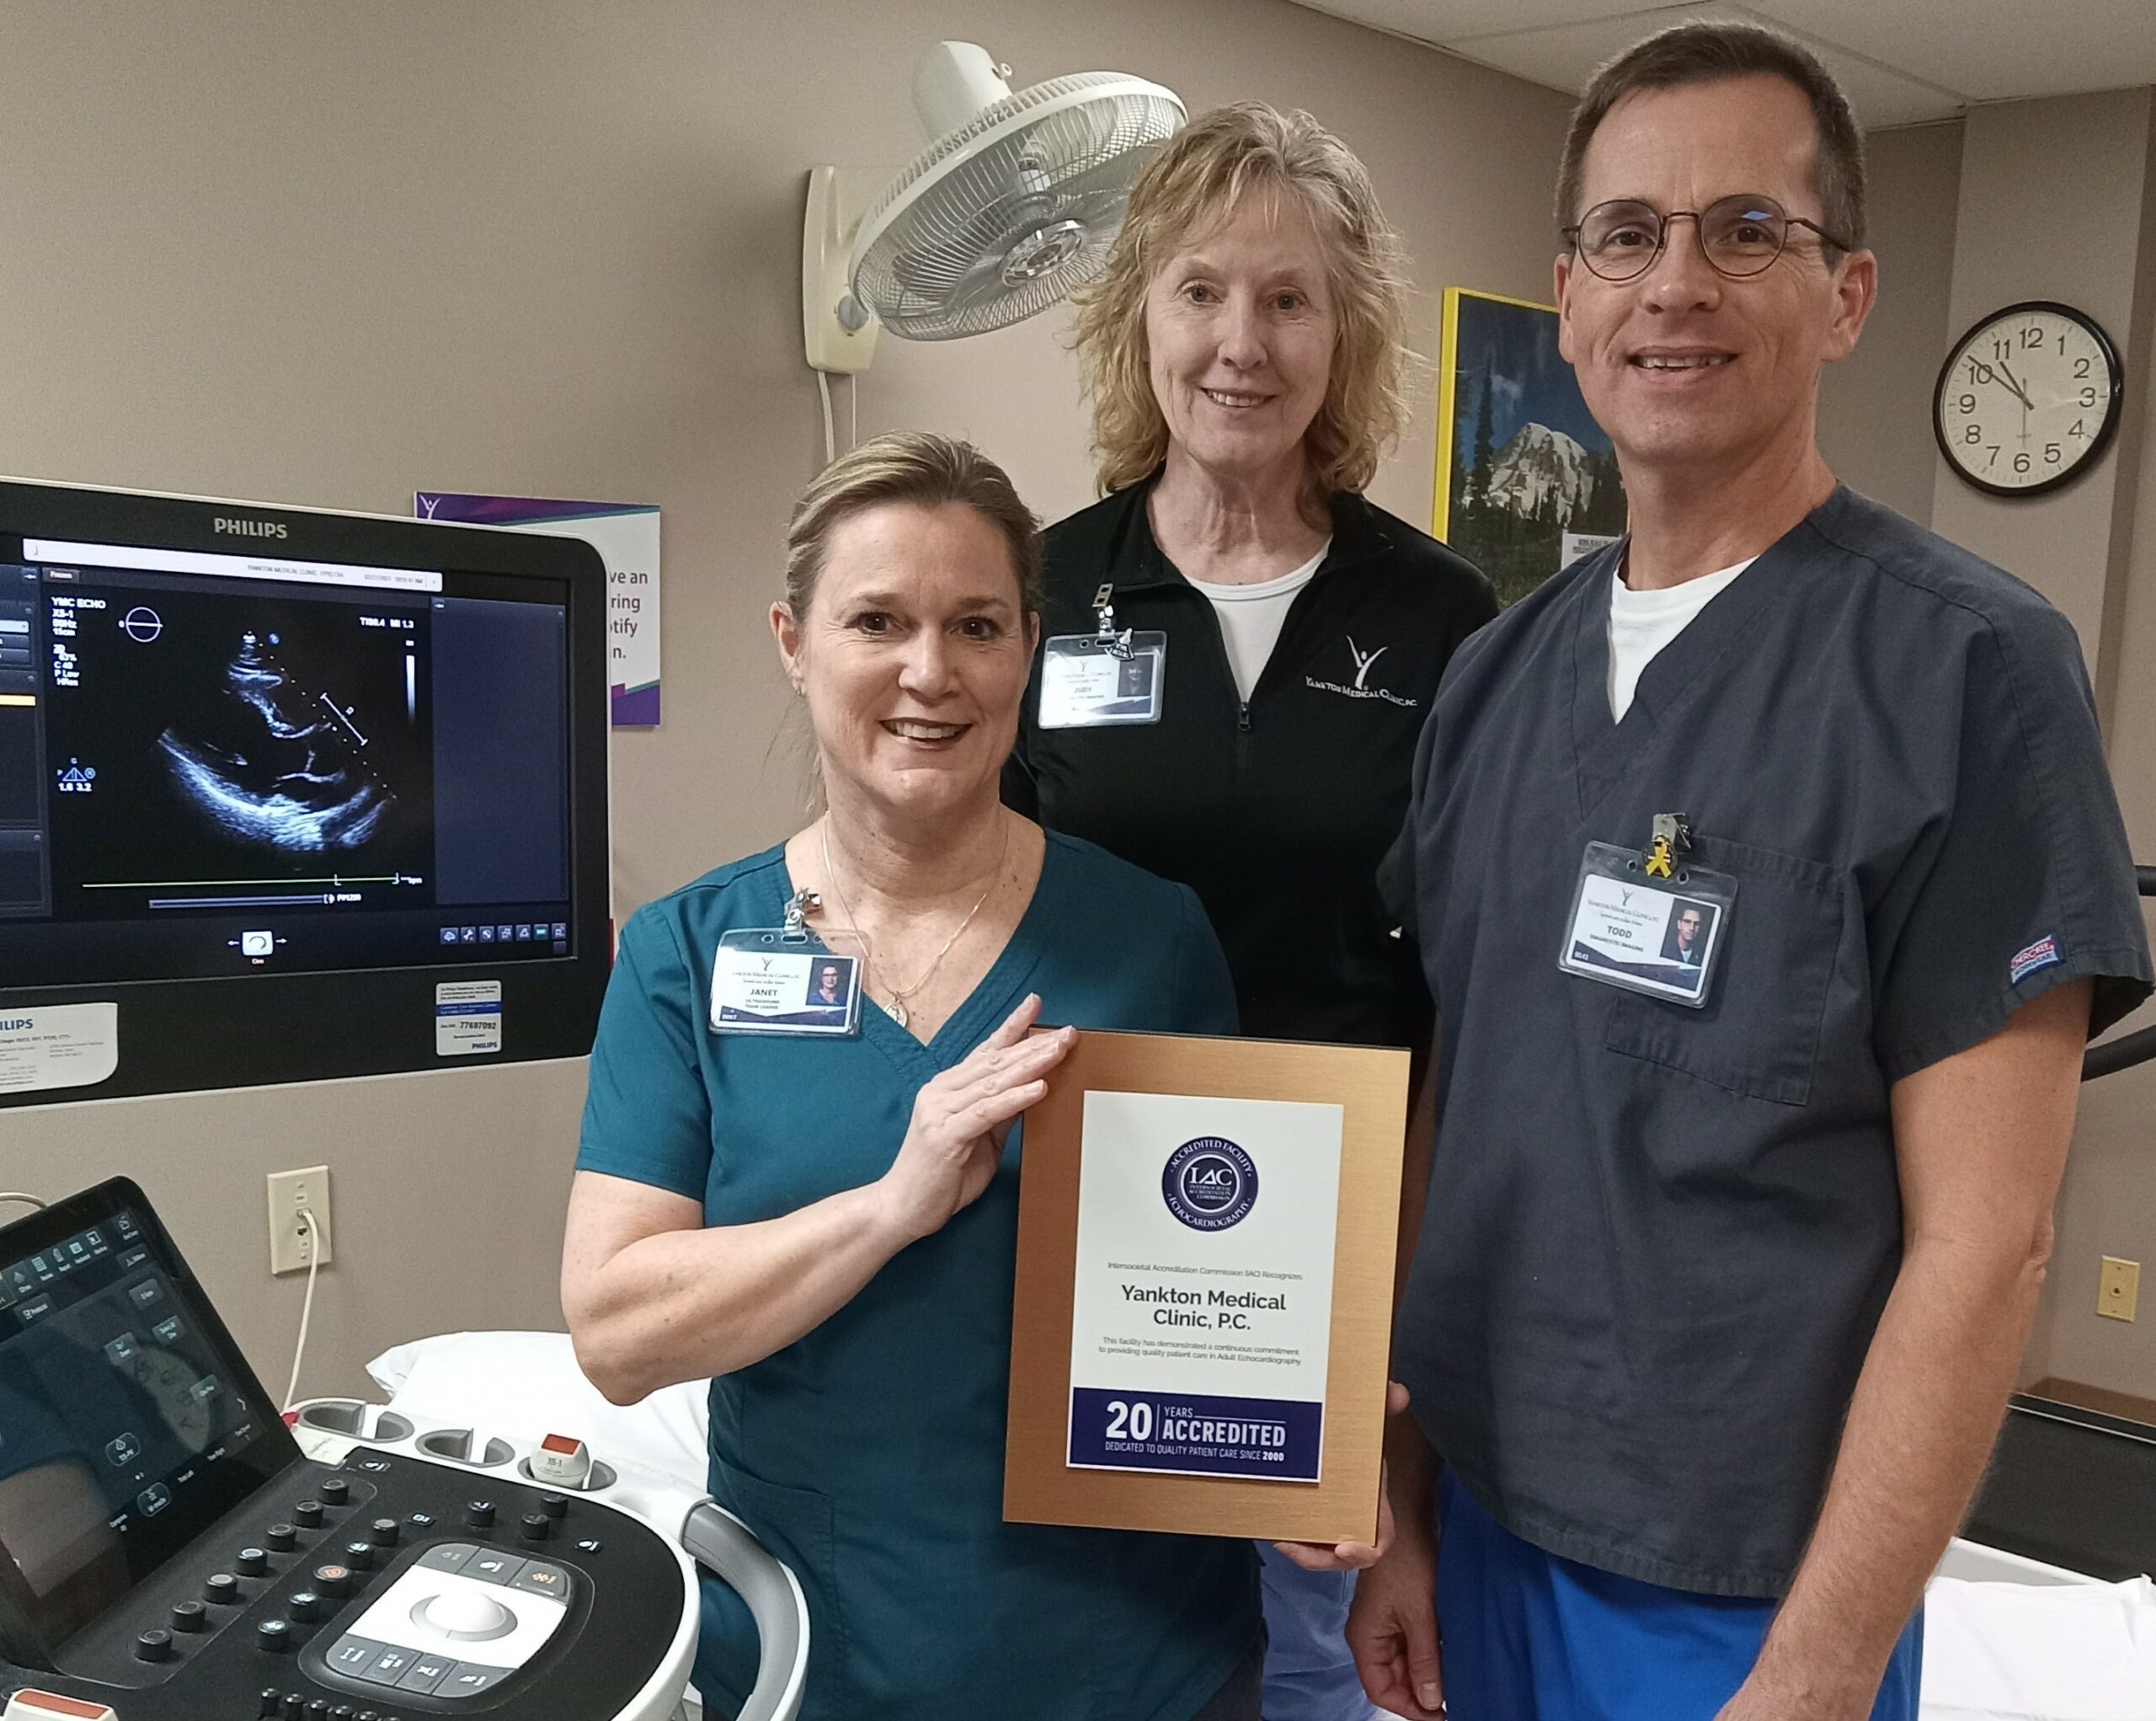 YMC Echocardiography honored with 20 Year Milestone